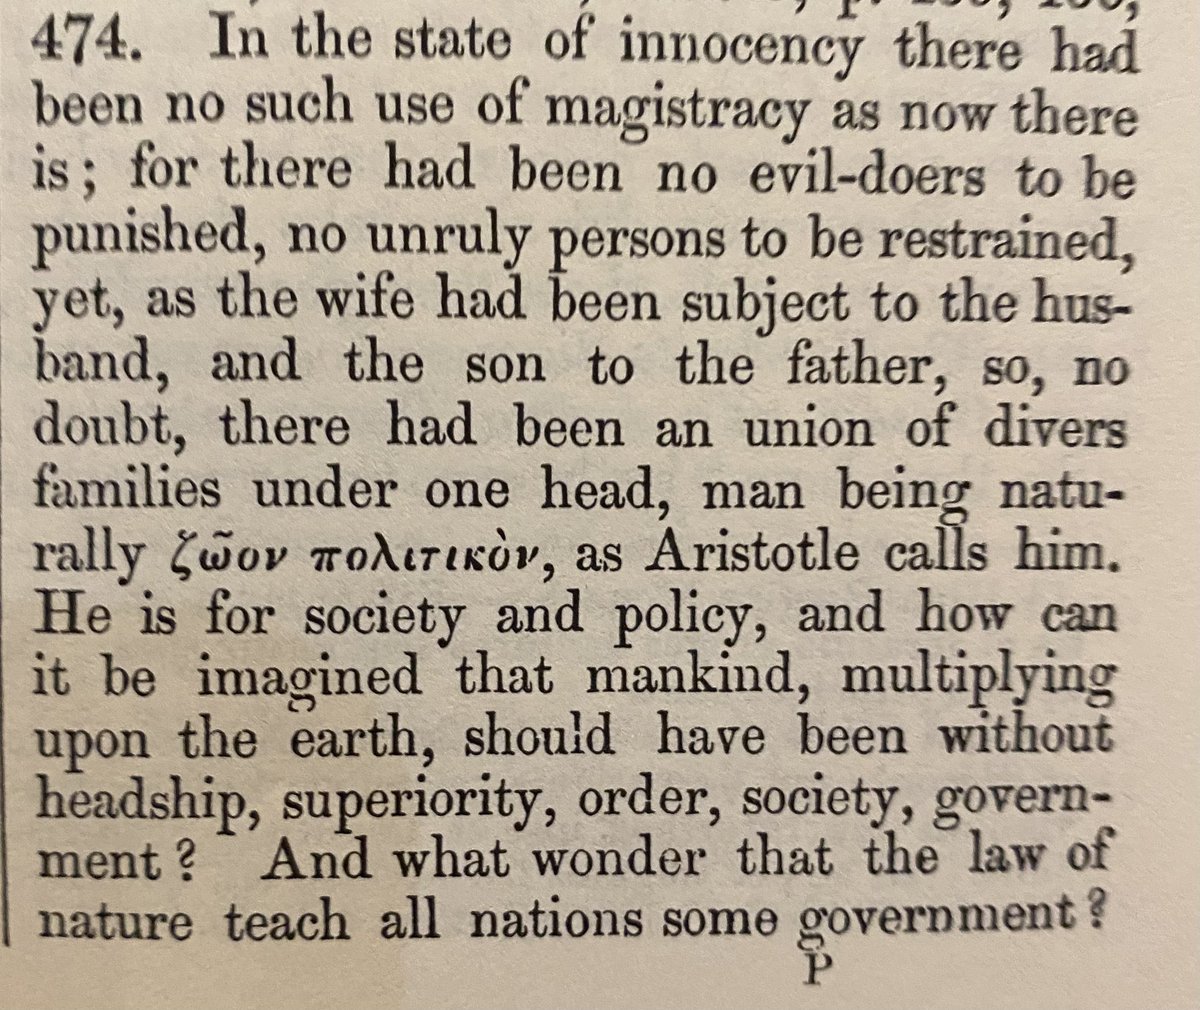 Gillespie’s explanation of the nature of prelapsarian civil government: